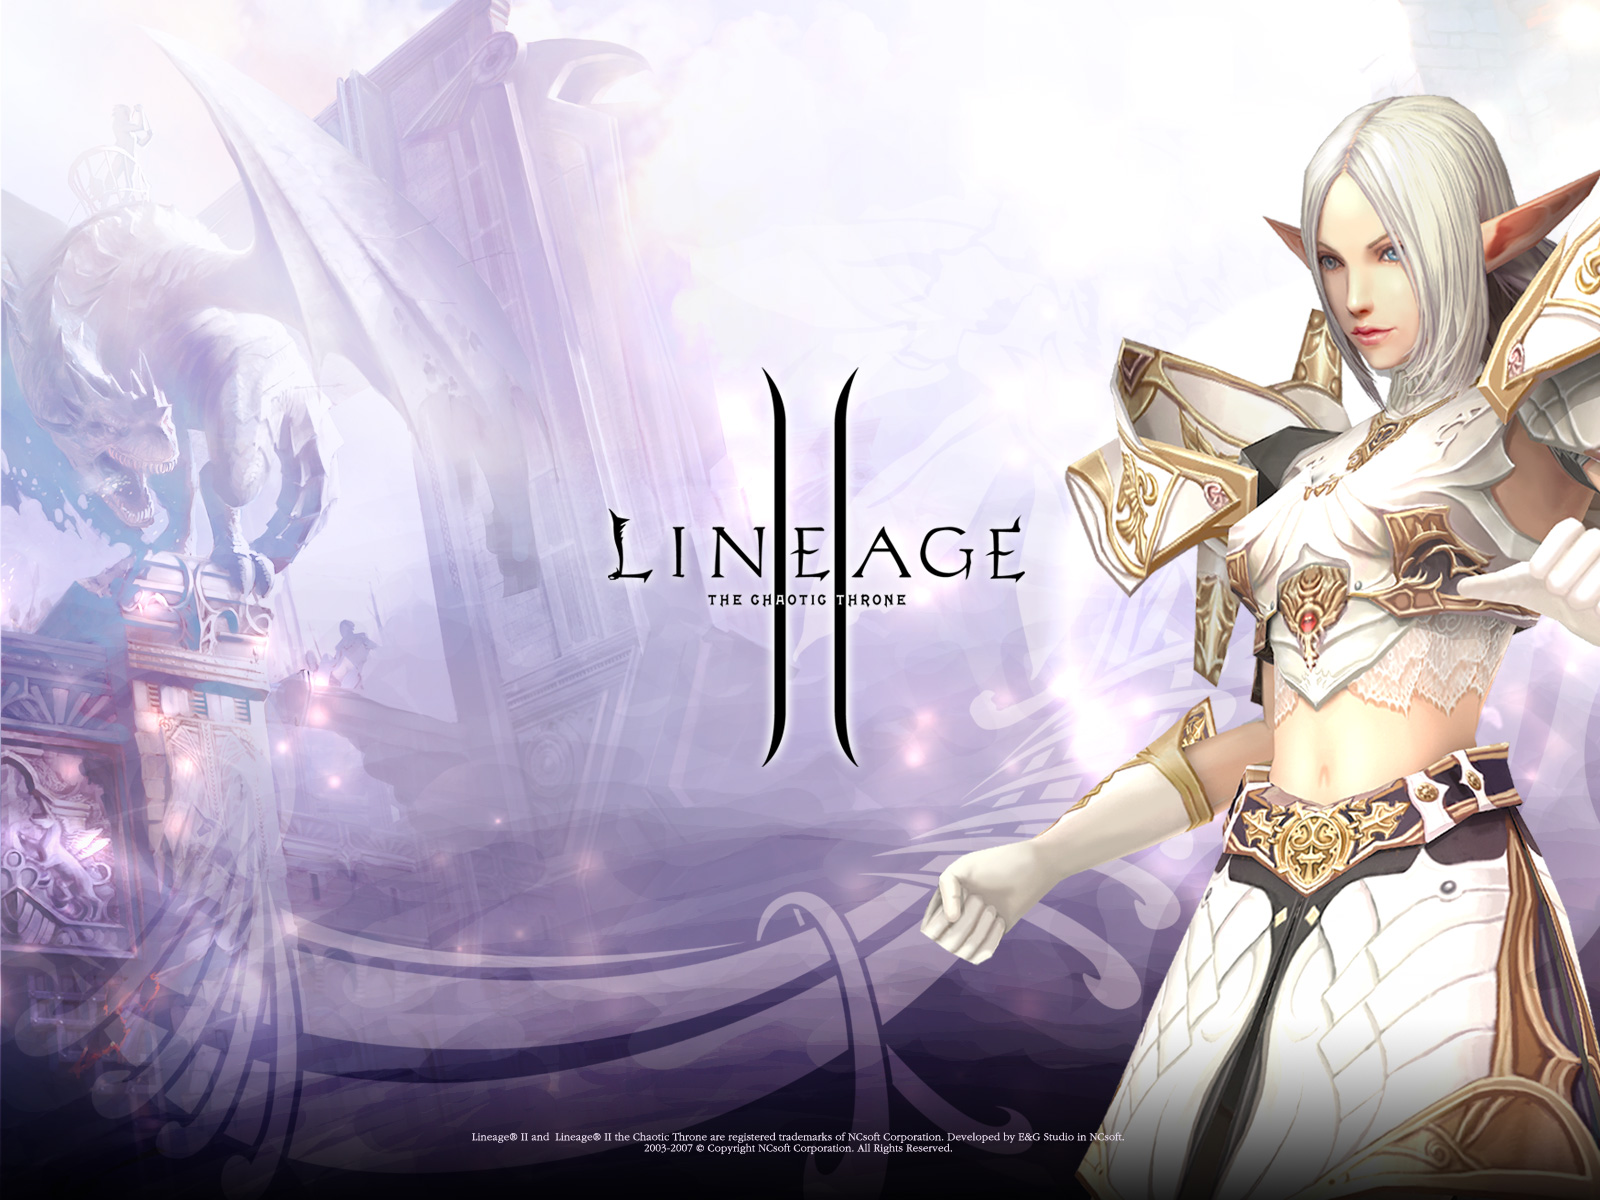 Download full size Lineage 2 The Chaotic Throne wallpaper / Games / 1600x1200